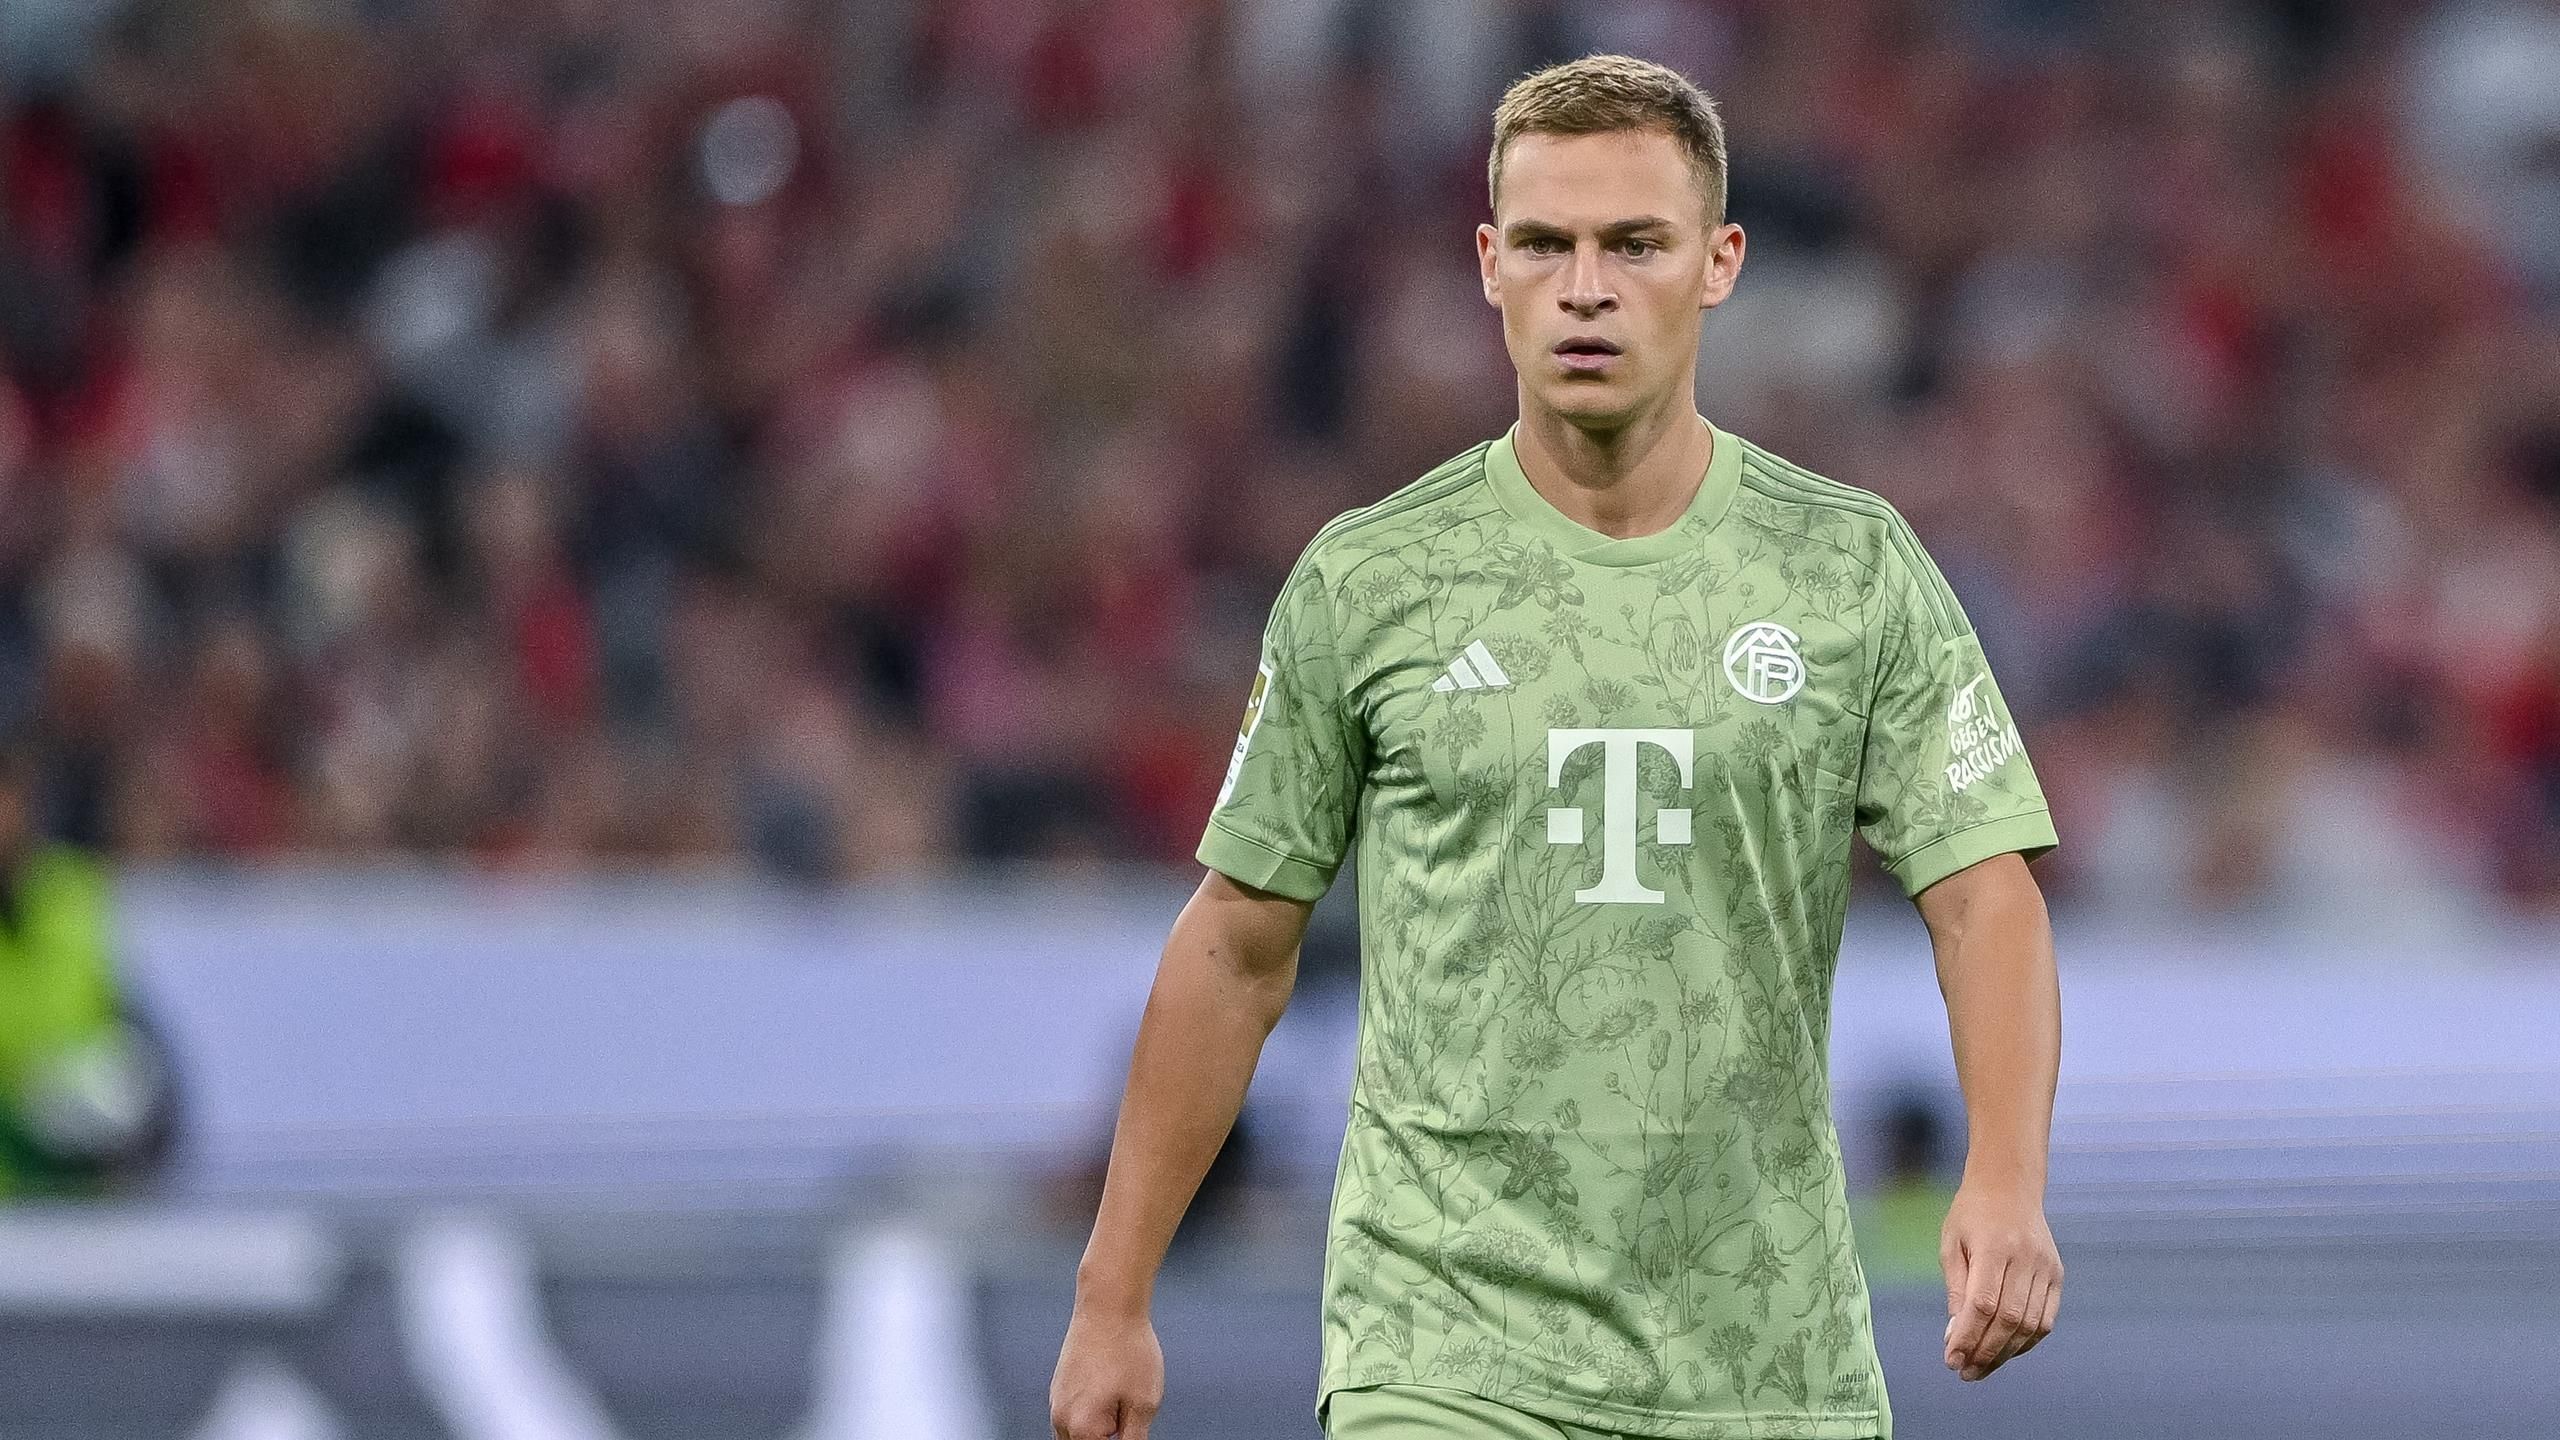 Bayern Munich – Michael Ballack has made a clear judgment on Kimmich and recommended Van Gaal as national team coach